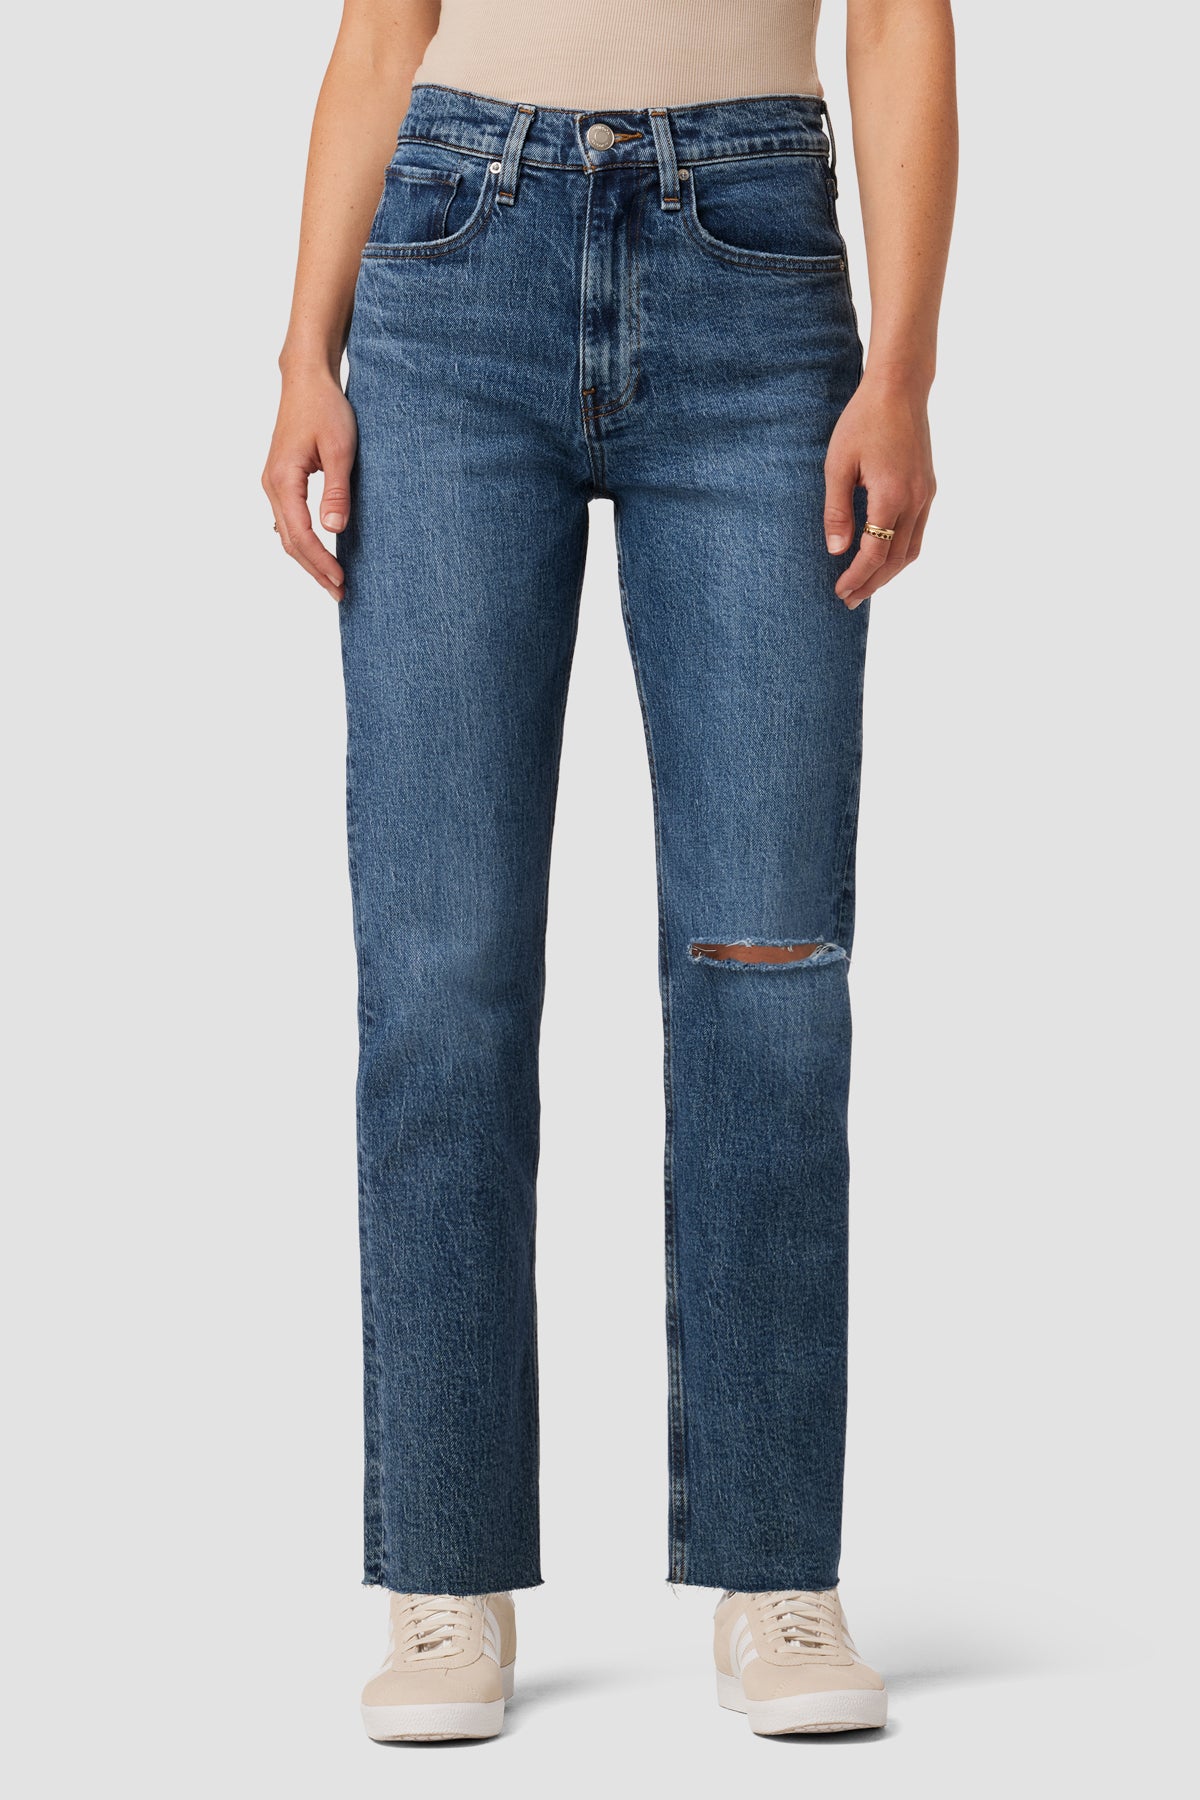 Jade High-Rise Straight Loose Fit Jean